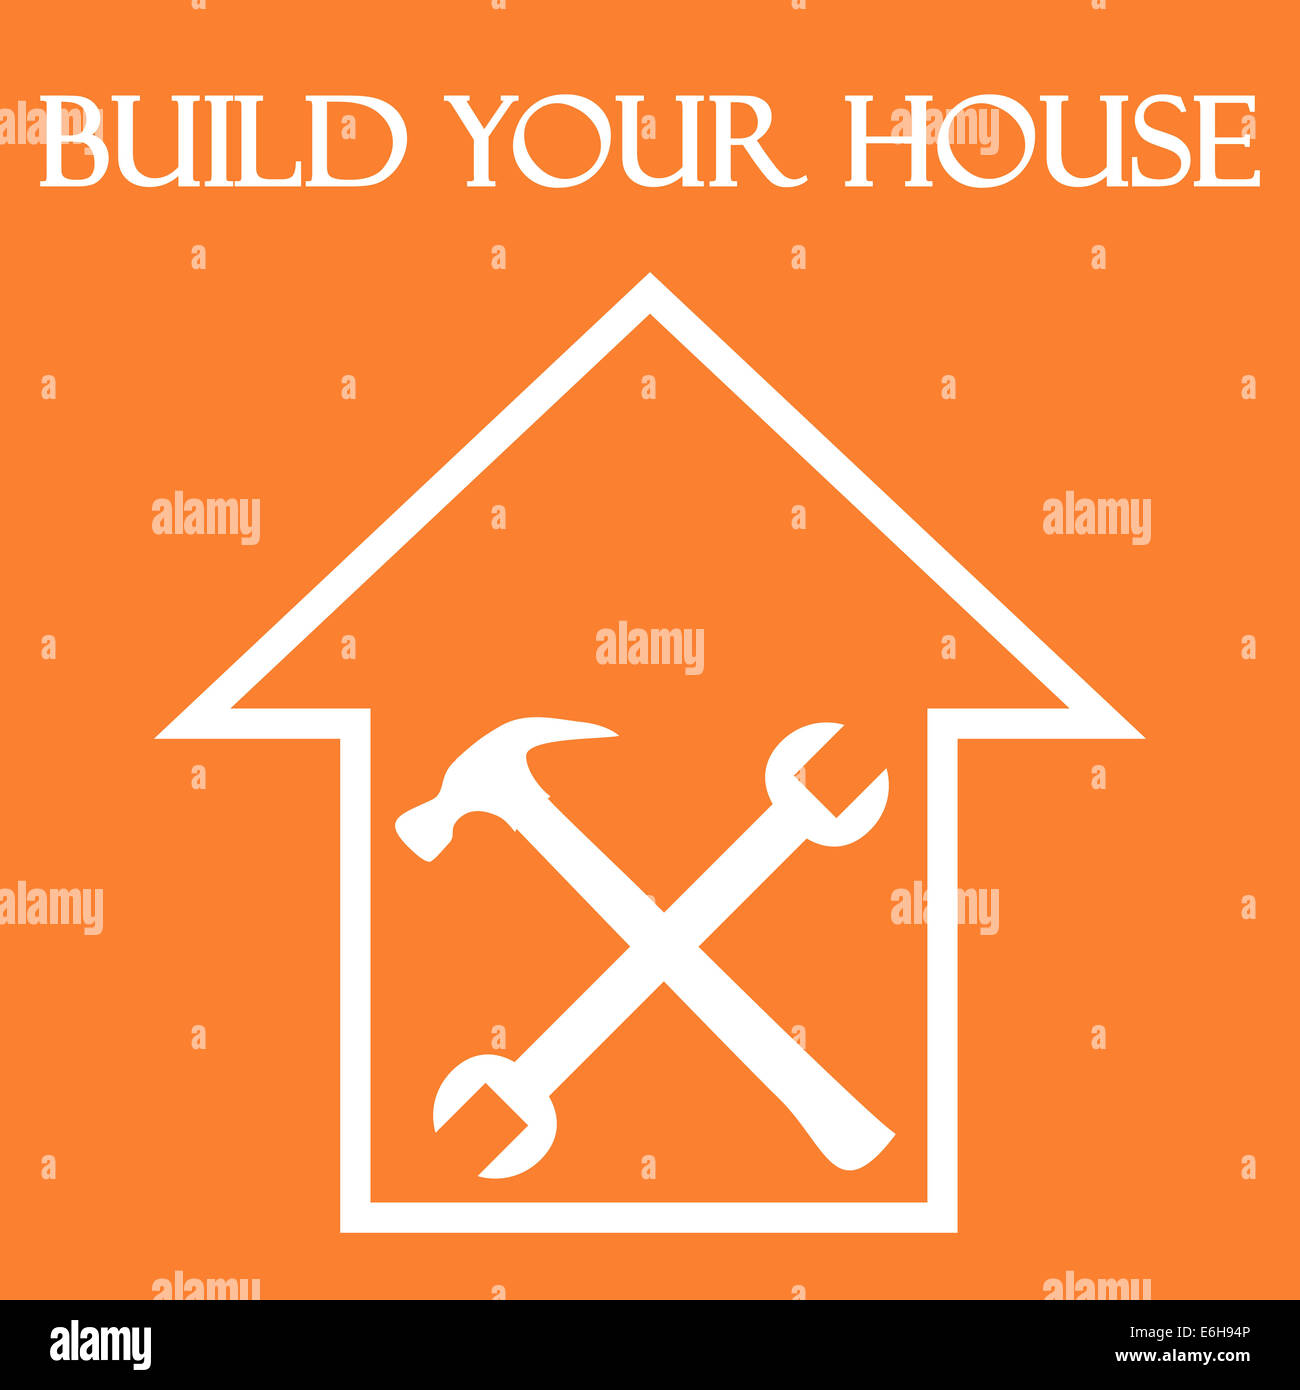 Build your house Stock Photo